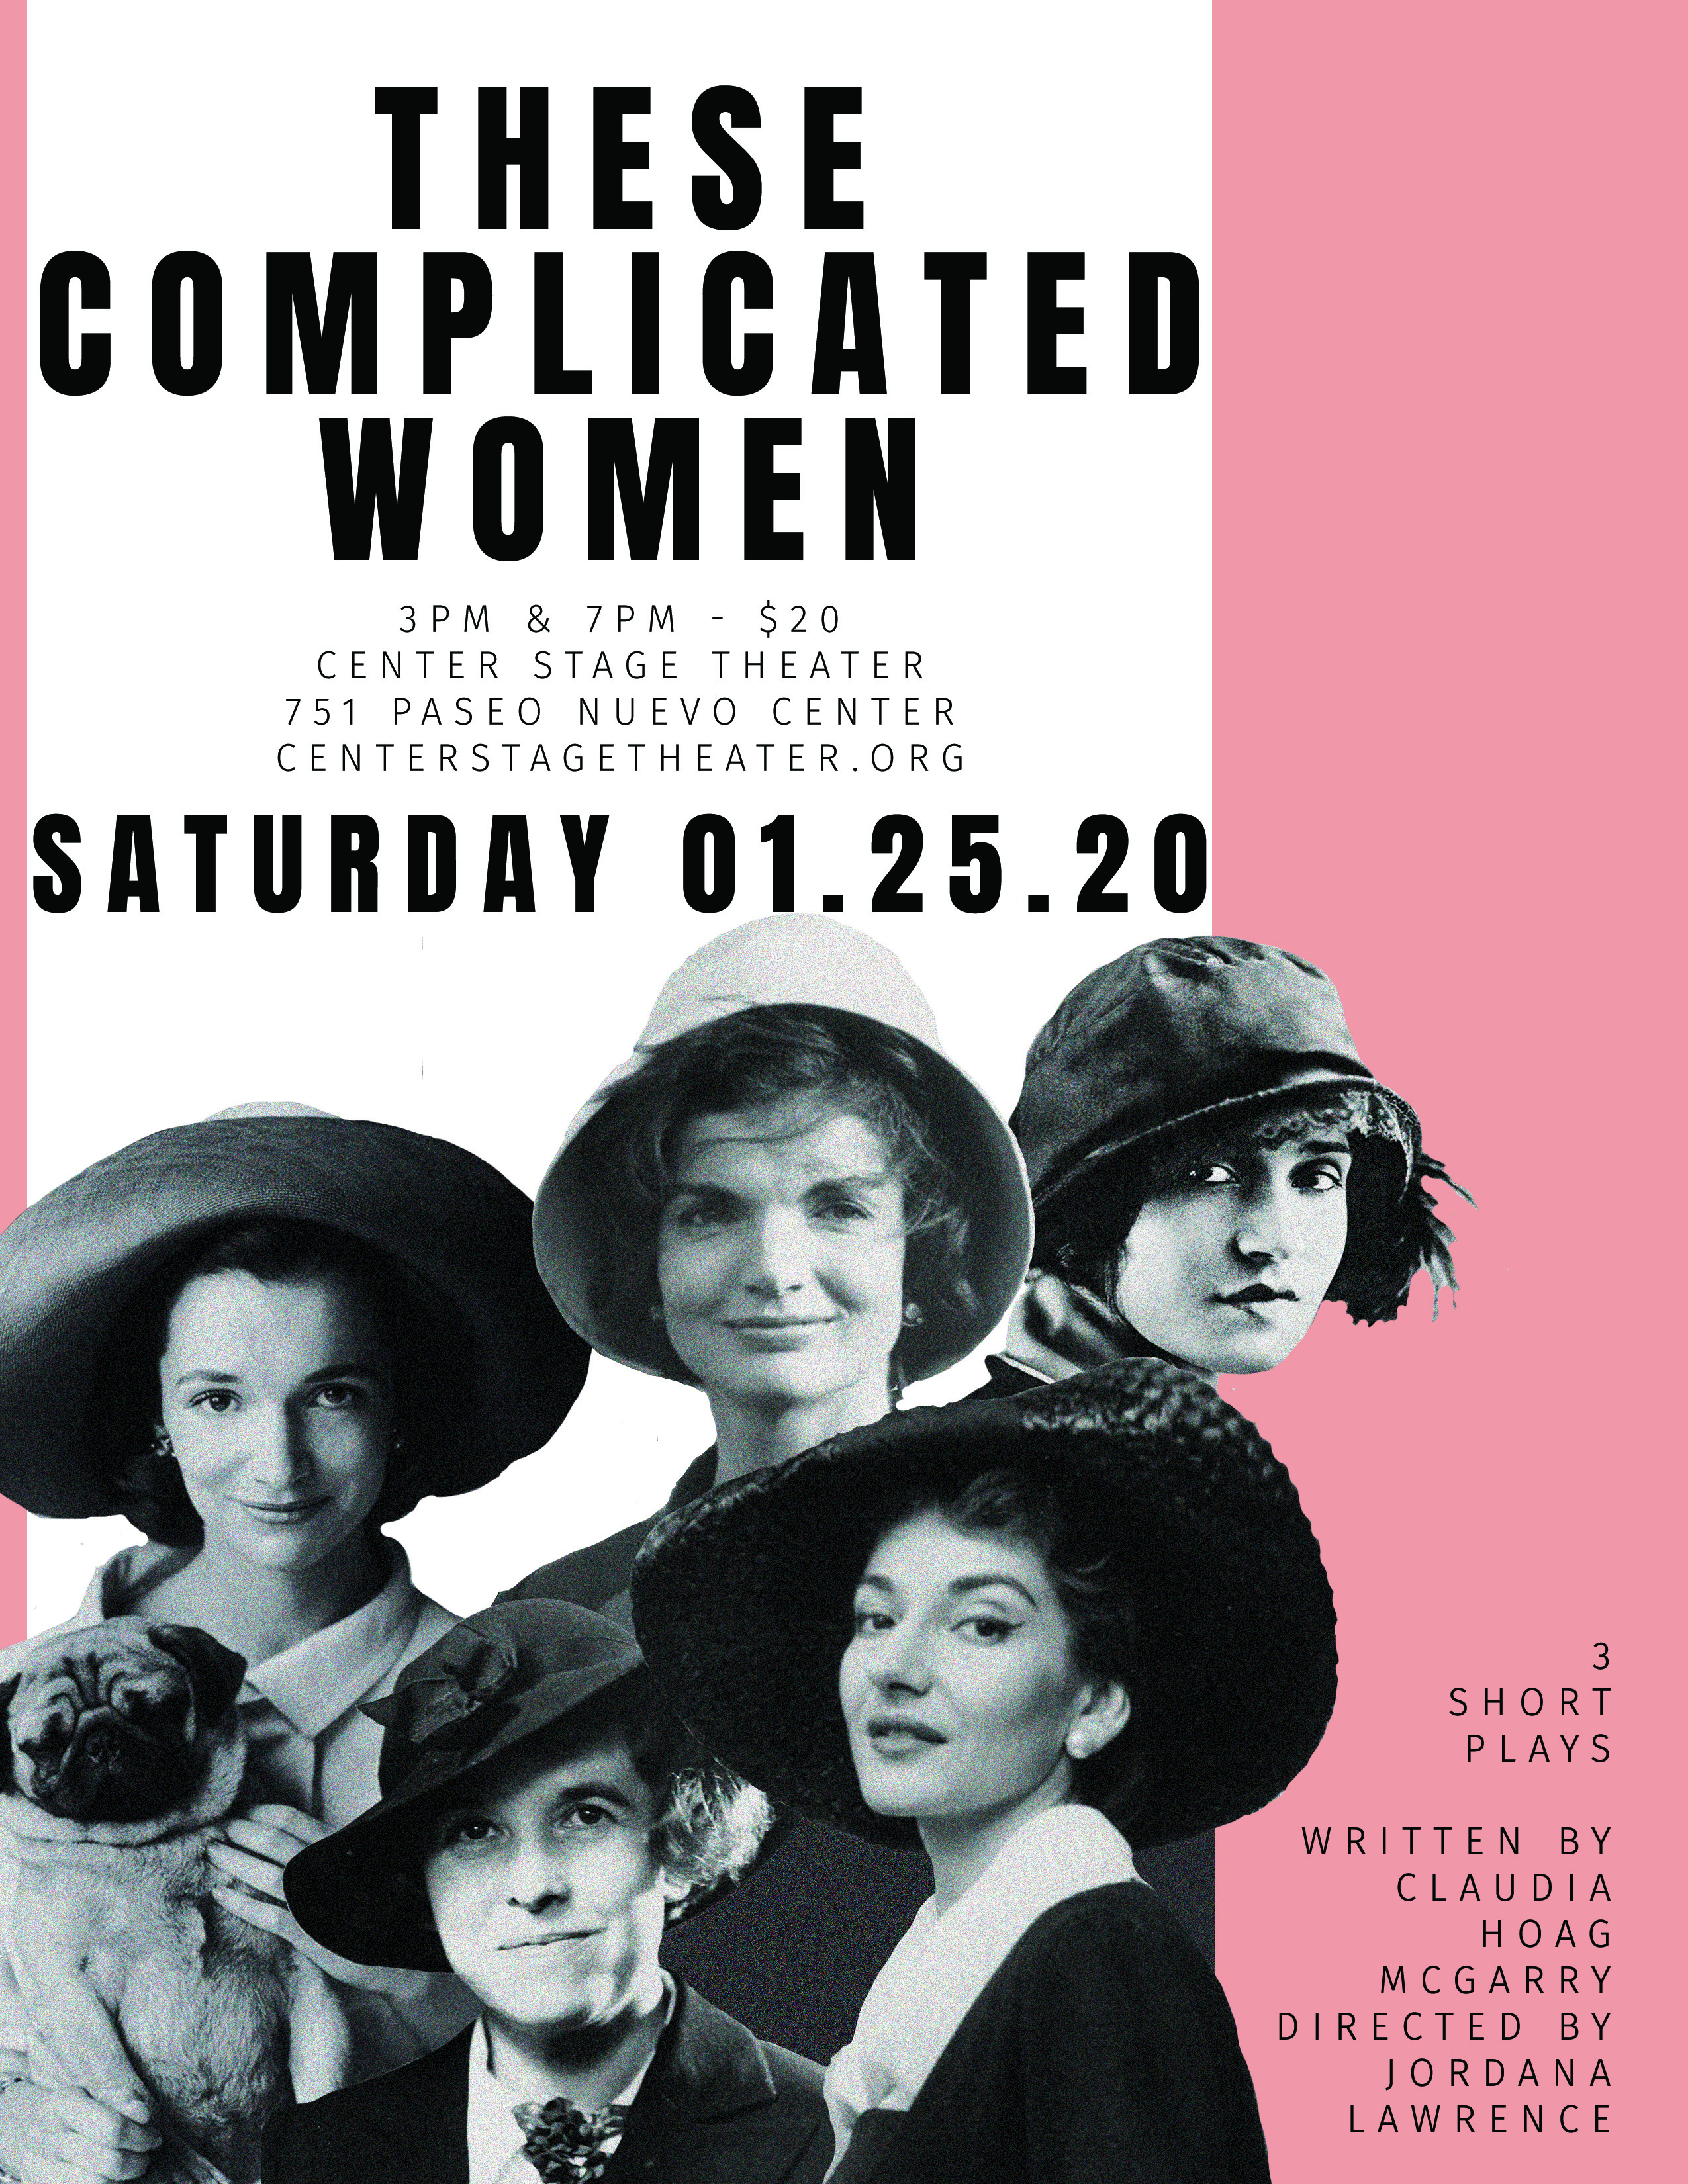 These Complicated Women